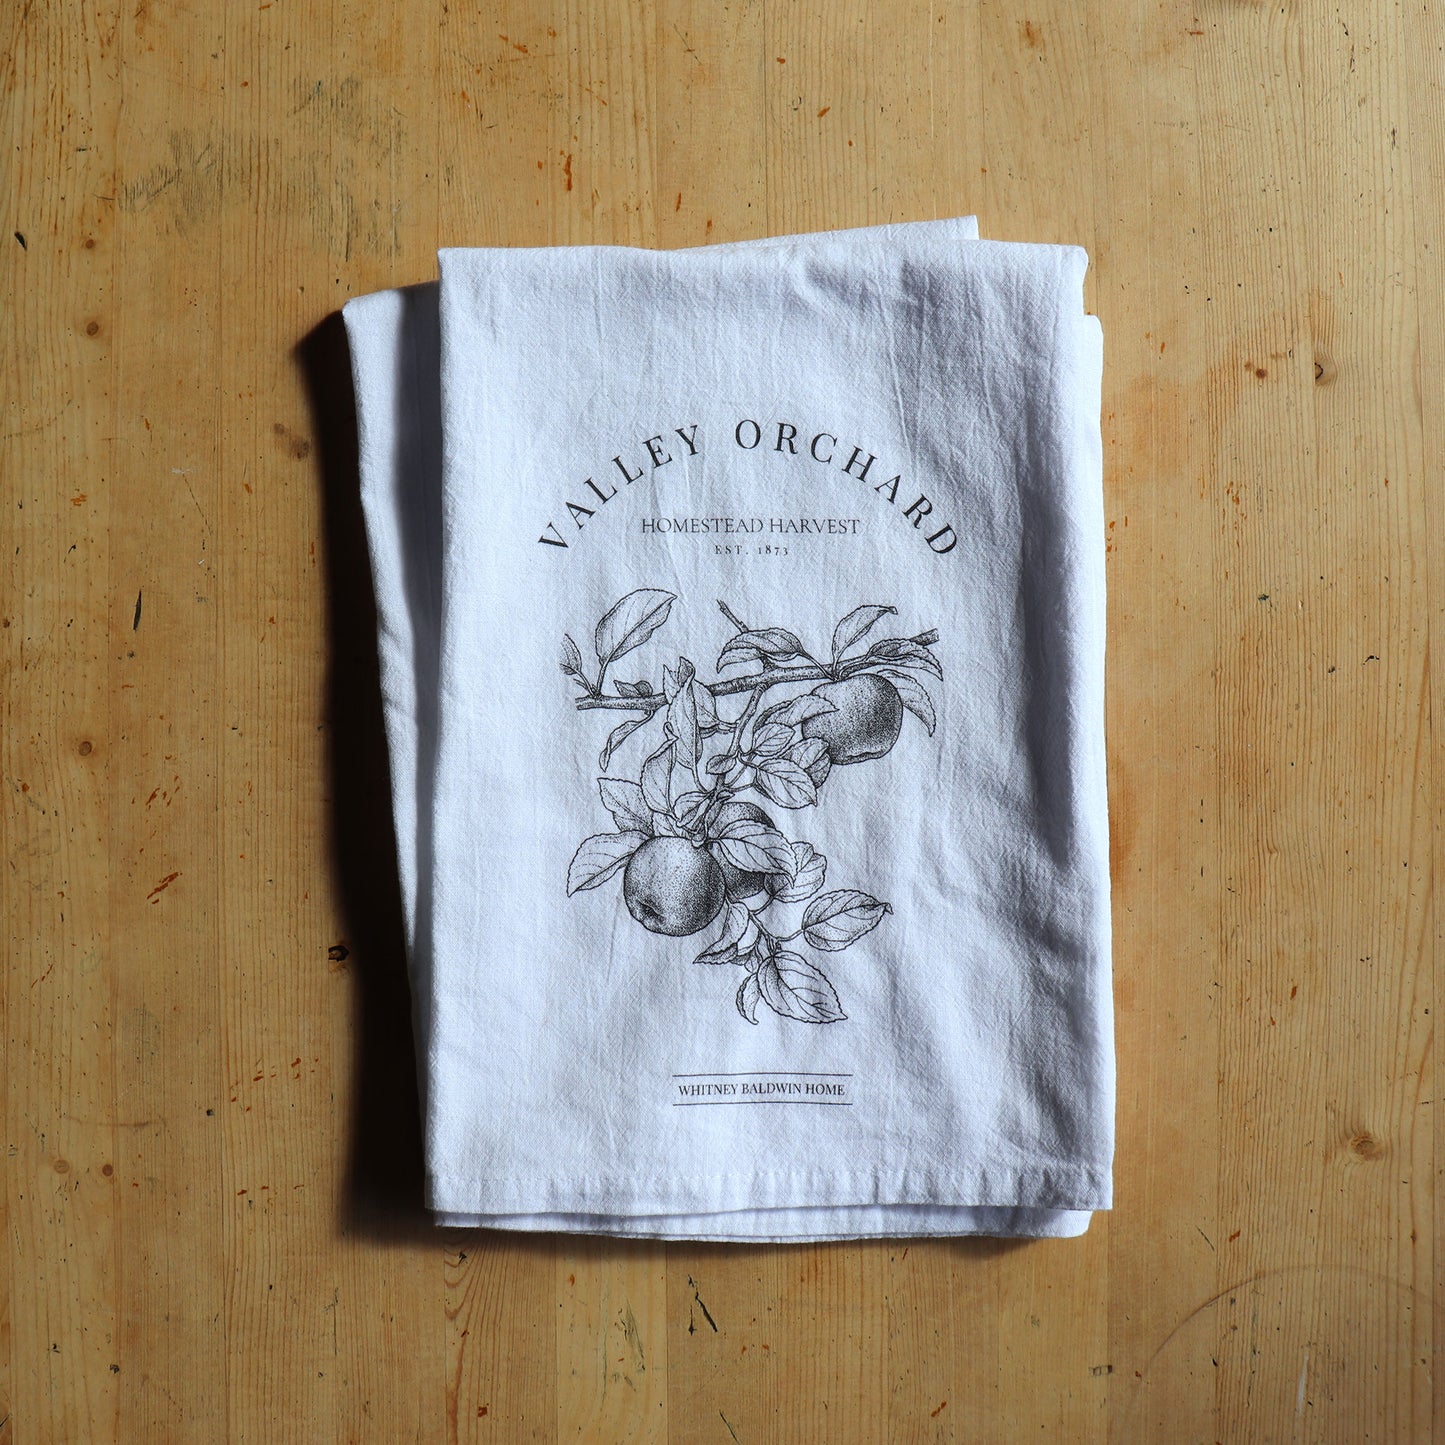 homestead harvest valley orchard apple orchard tea towel. Tea towel in a stack with other tea towels form the homestead harvest collection. 